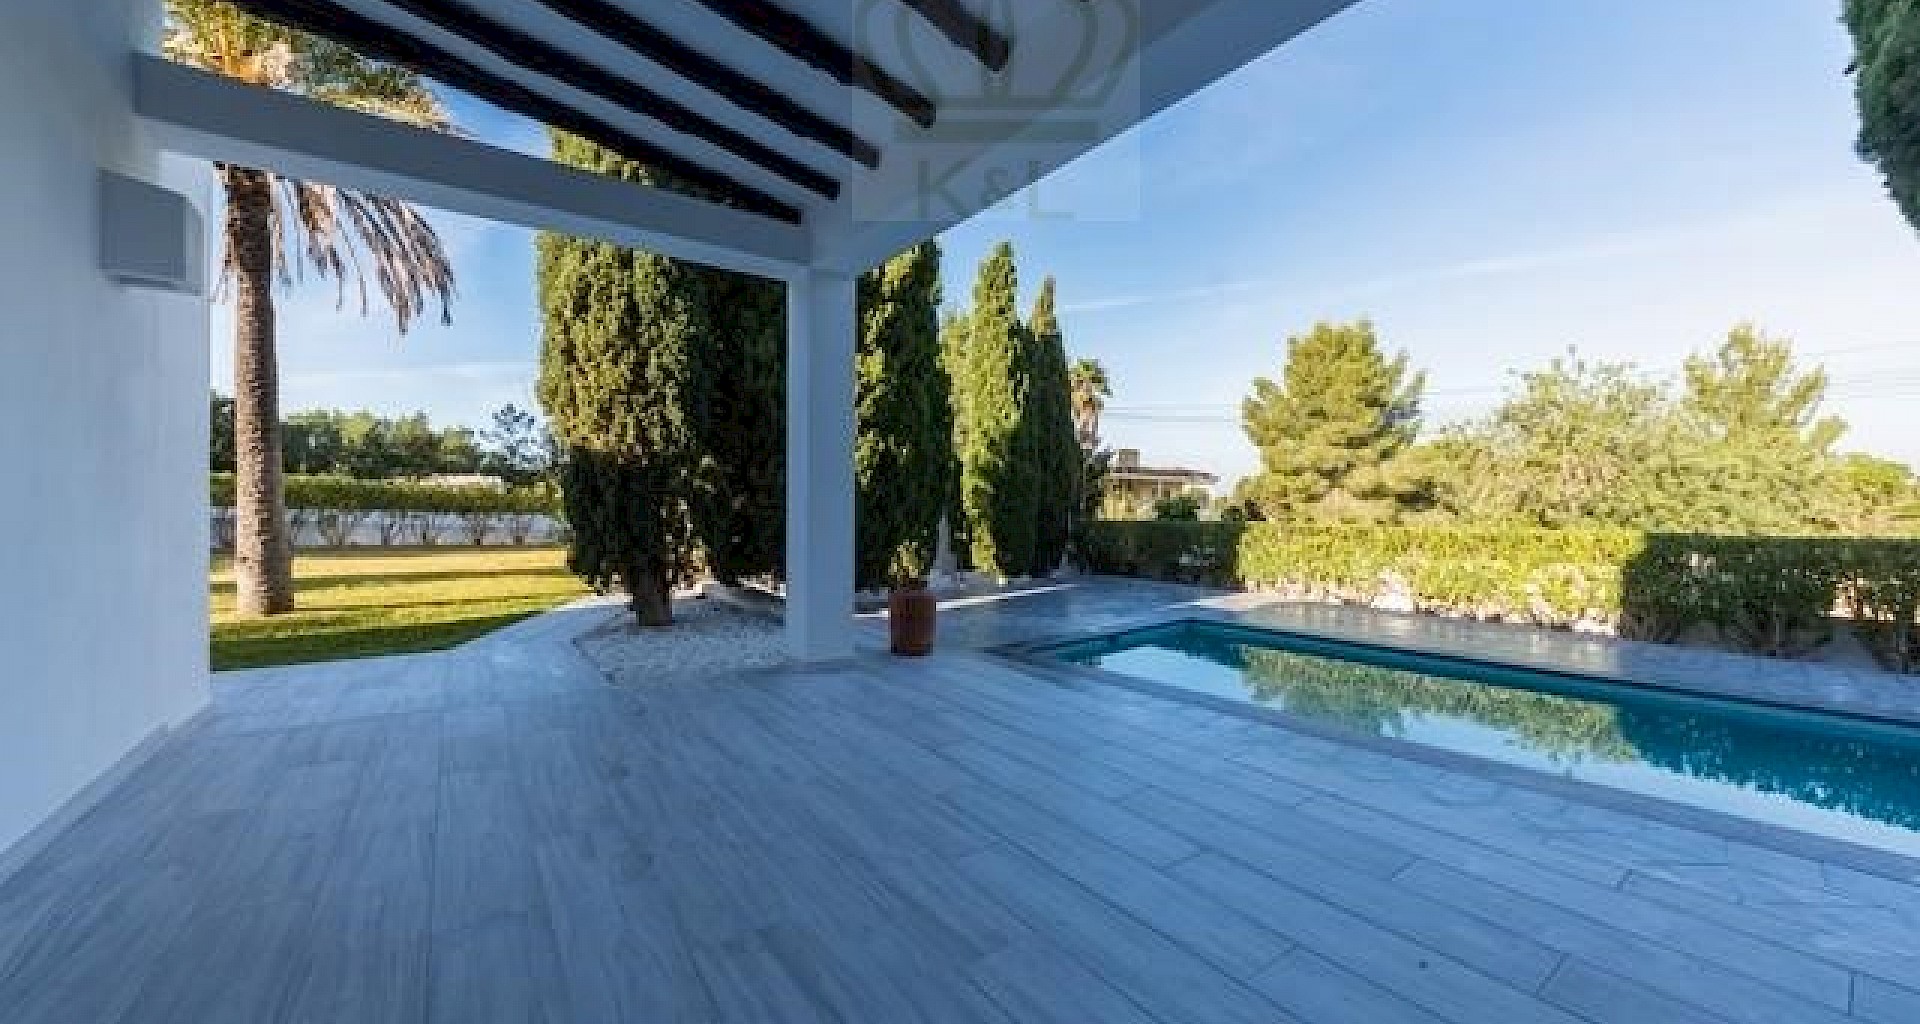 KROHN & LUEDEMANN Completely renovated house in Ibiza with pool and lots of privacy Benimussa (11)